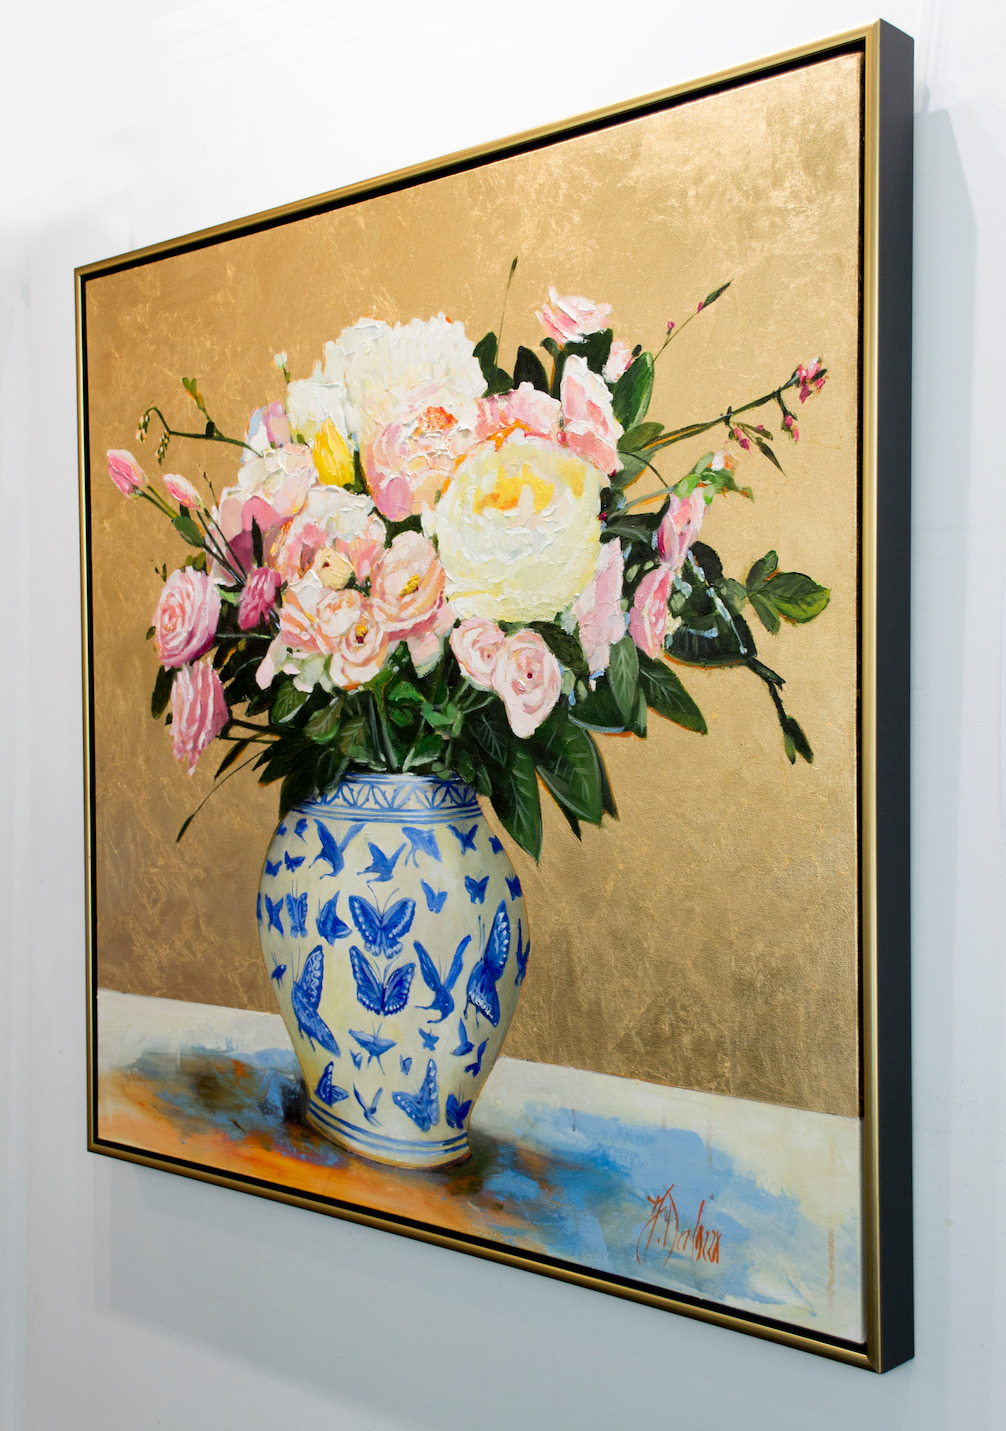 Framed Side View Of Still Life Painting "Pink Melody" By Judith Dalozzo